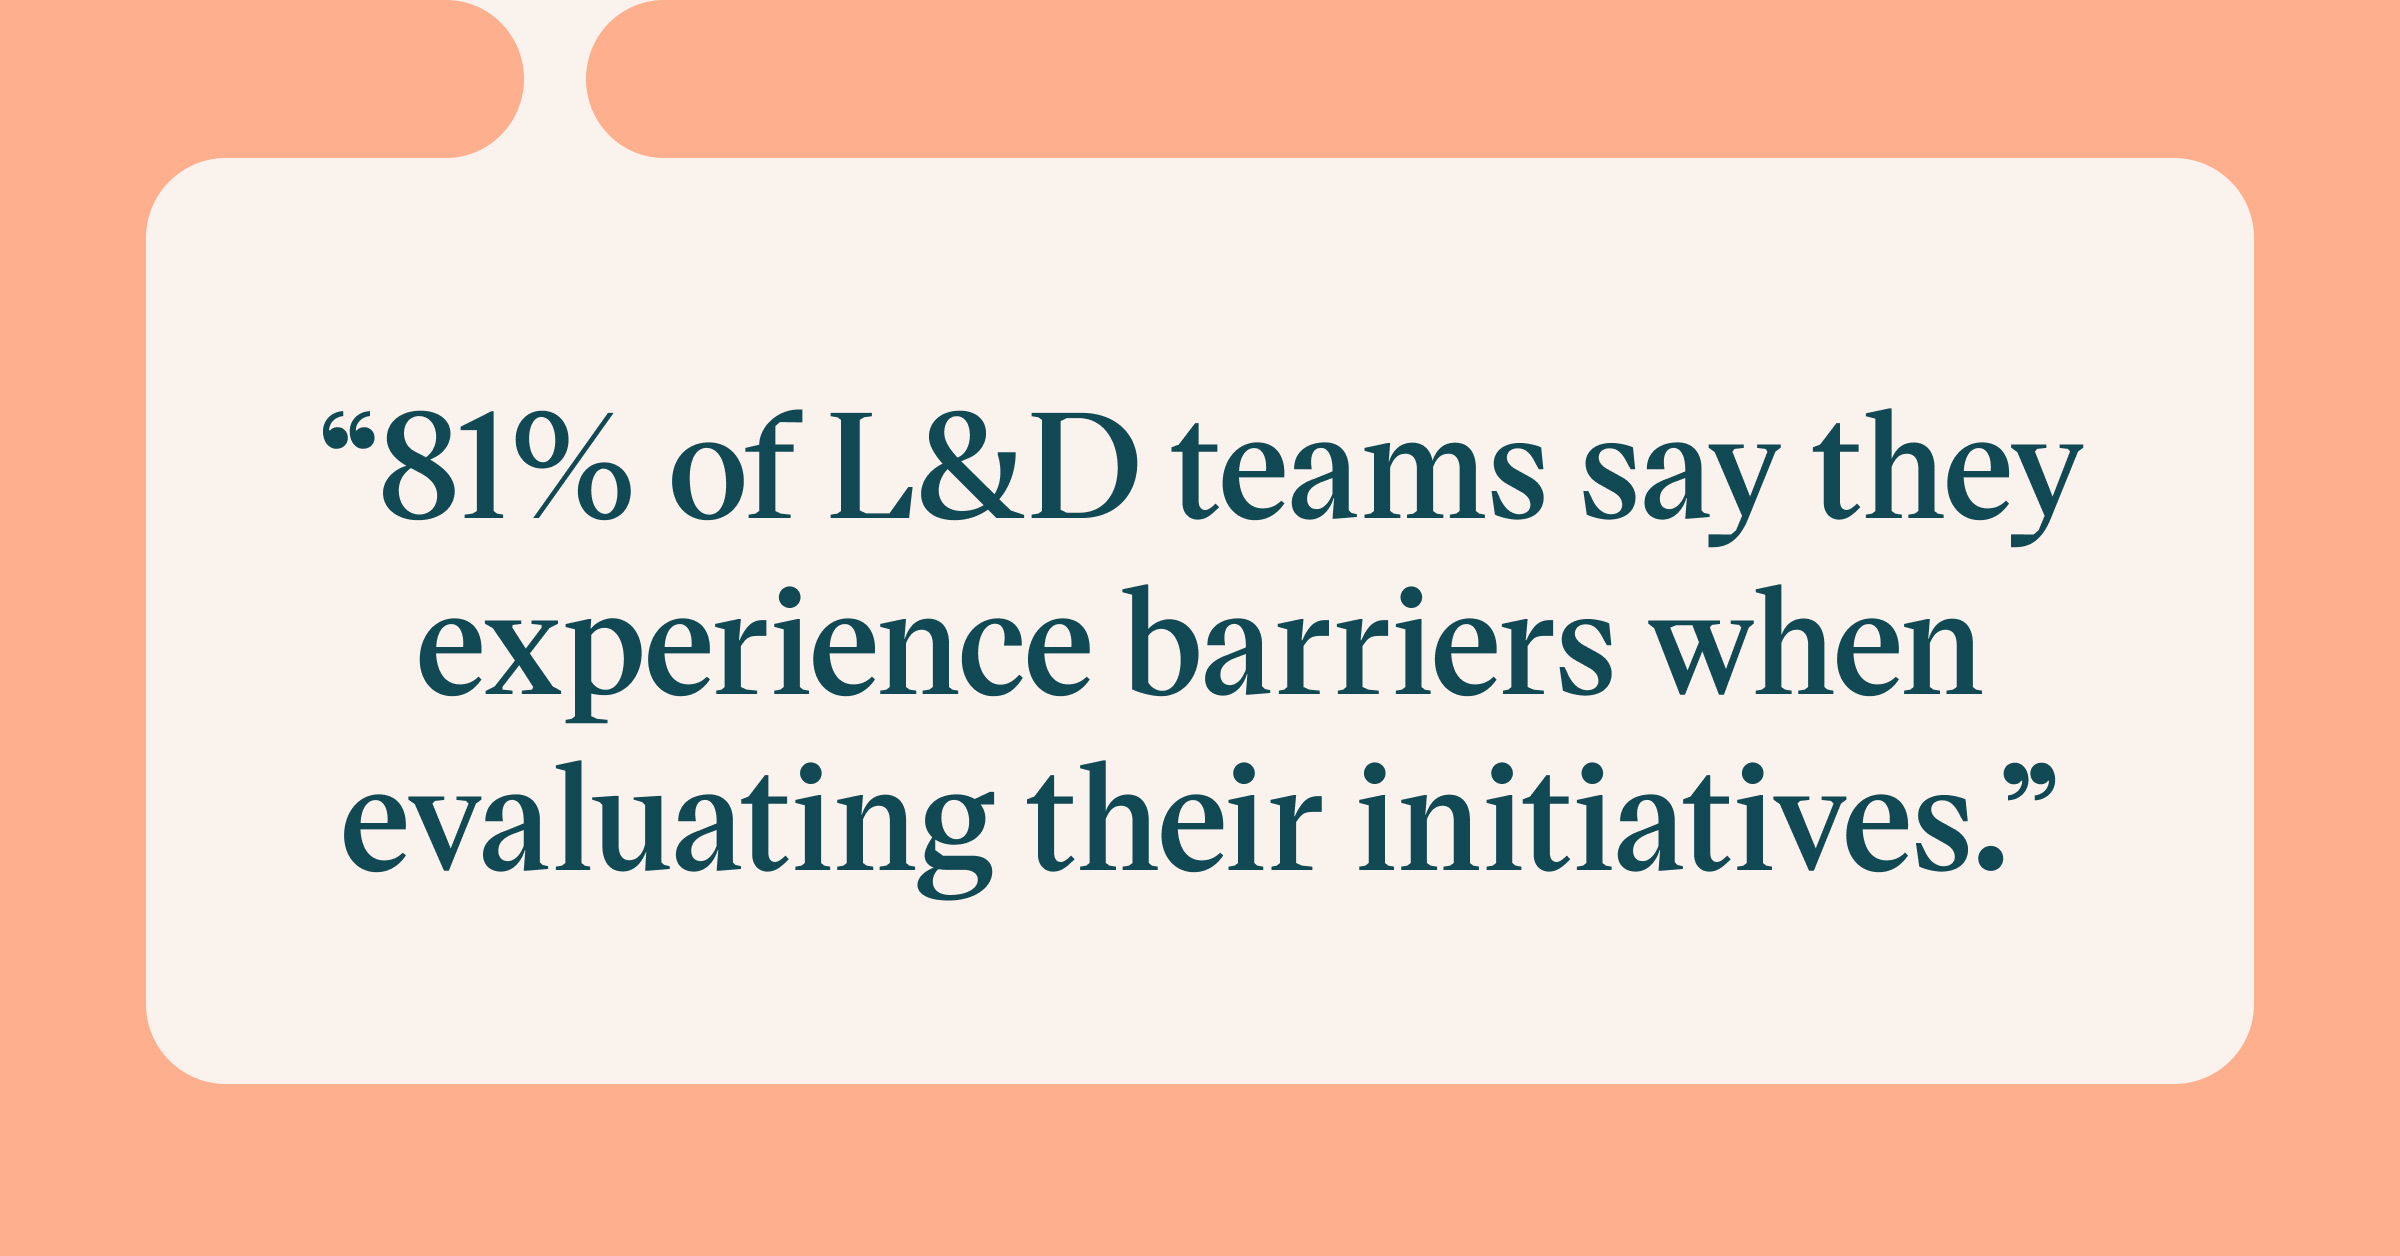 Pull quote with the text: 81% of L&D teams say they experience barriers when evaluating their initiatives